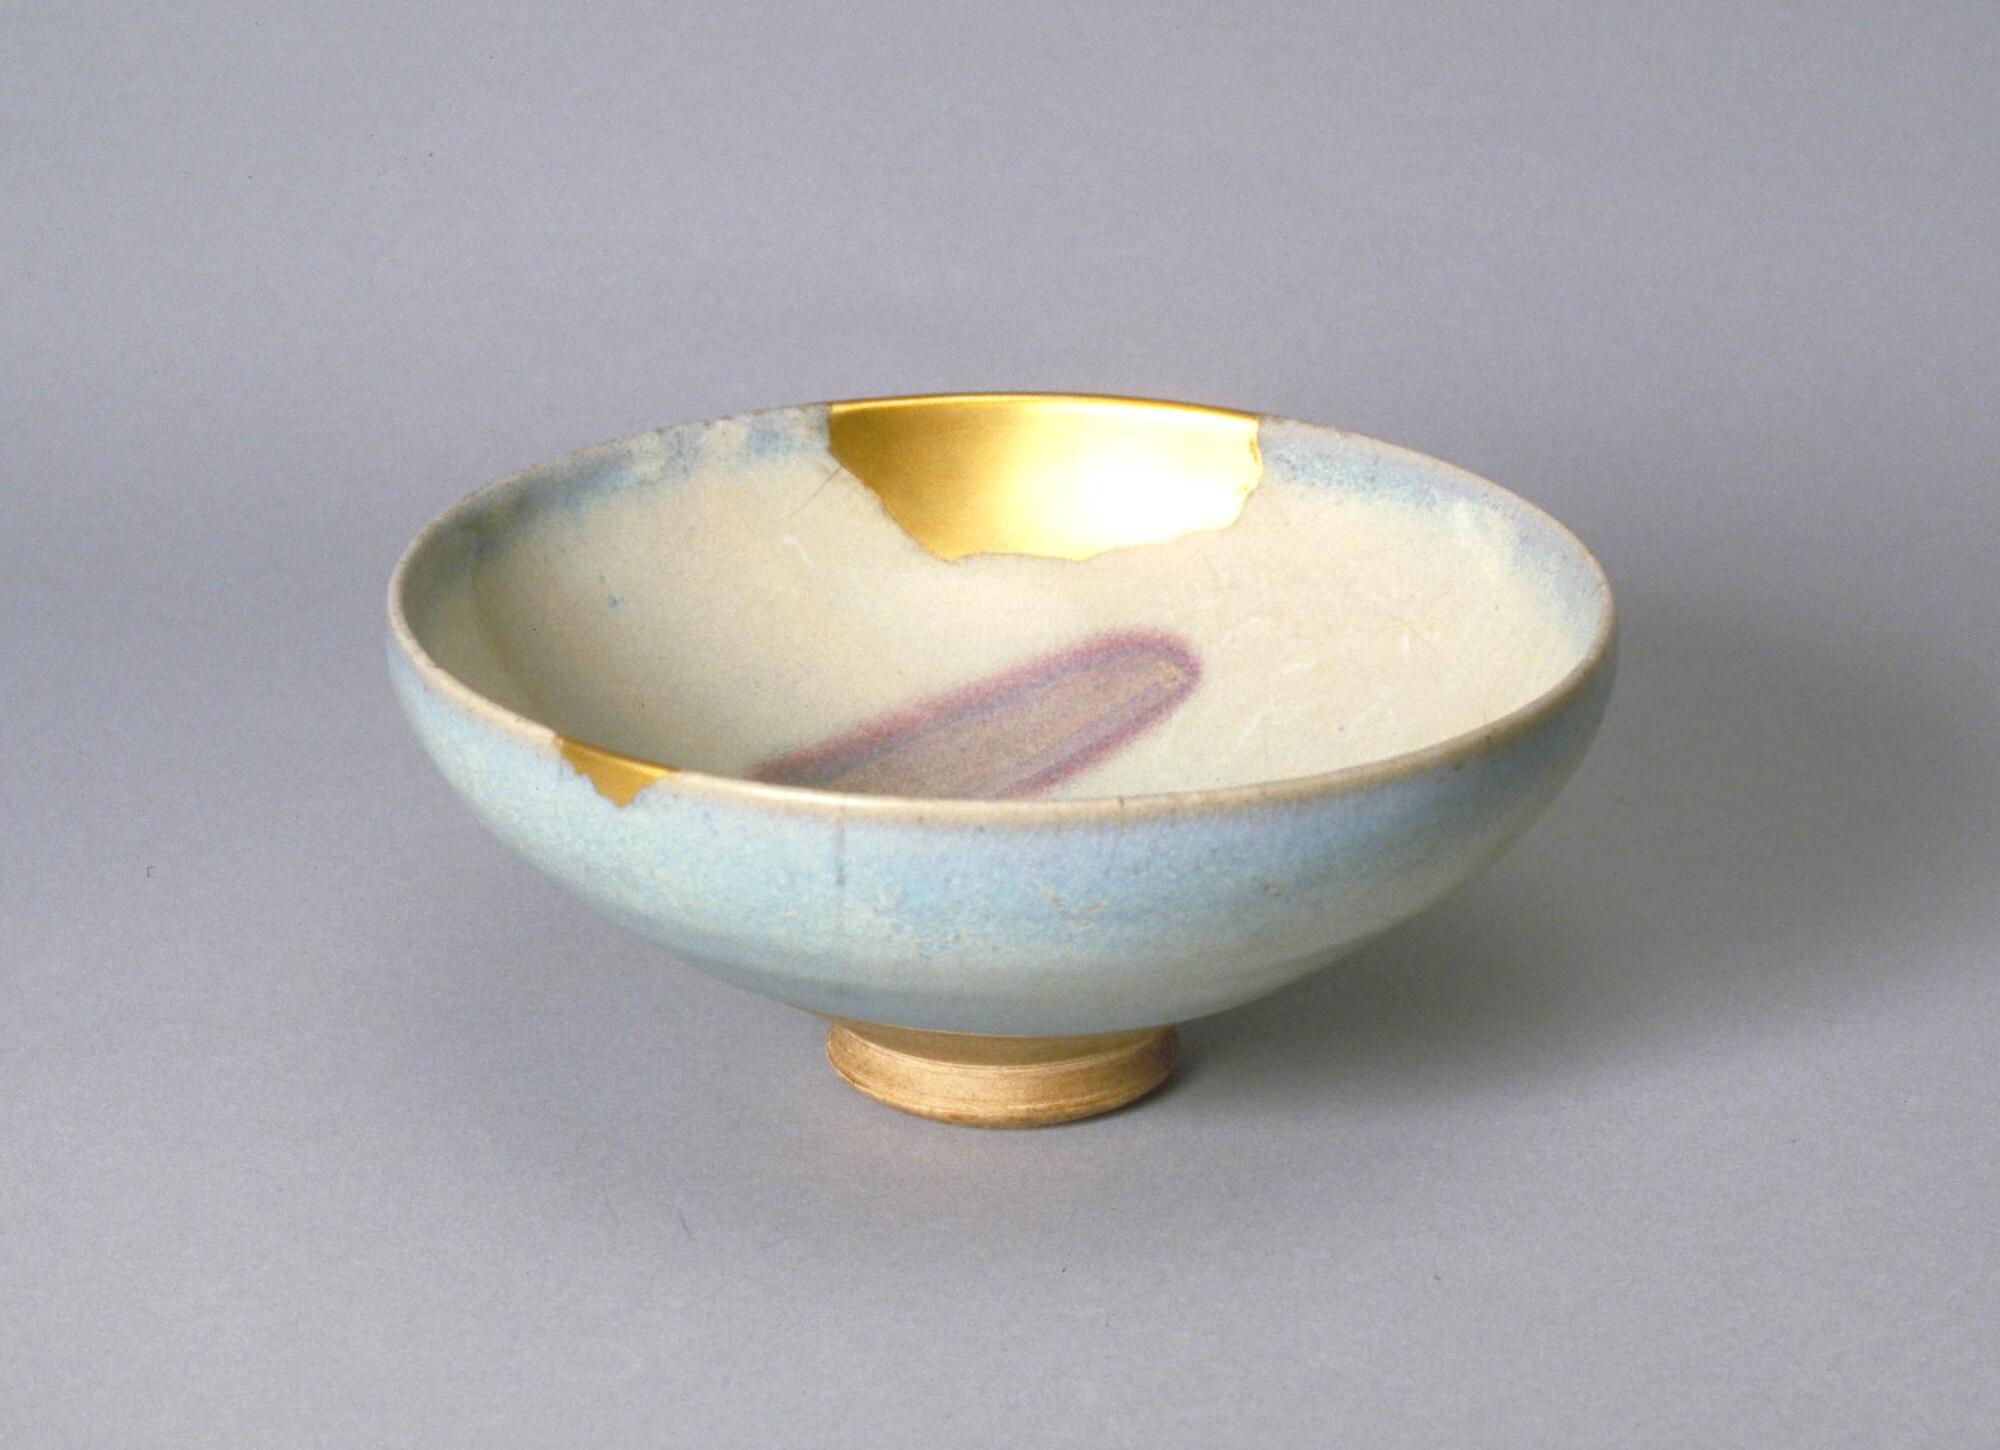 This shallow conical bowl on a straight footring is covered in a pale blue opaque glaze, the interior is moon-white and the exterior, sky blue. There is a copper reddish-purple splash to the interior and two gold repairs along the rim and side.